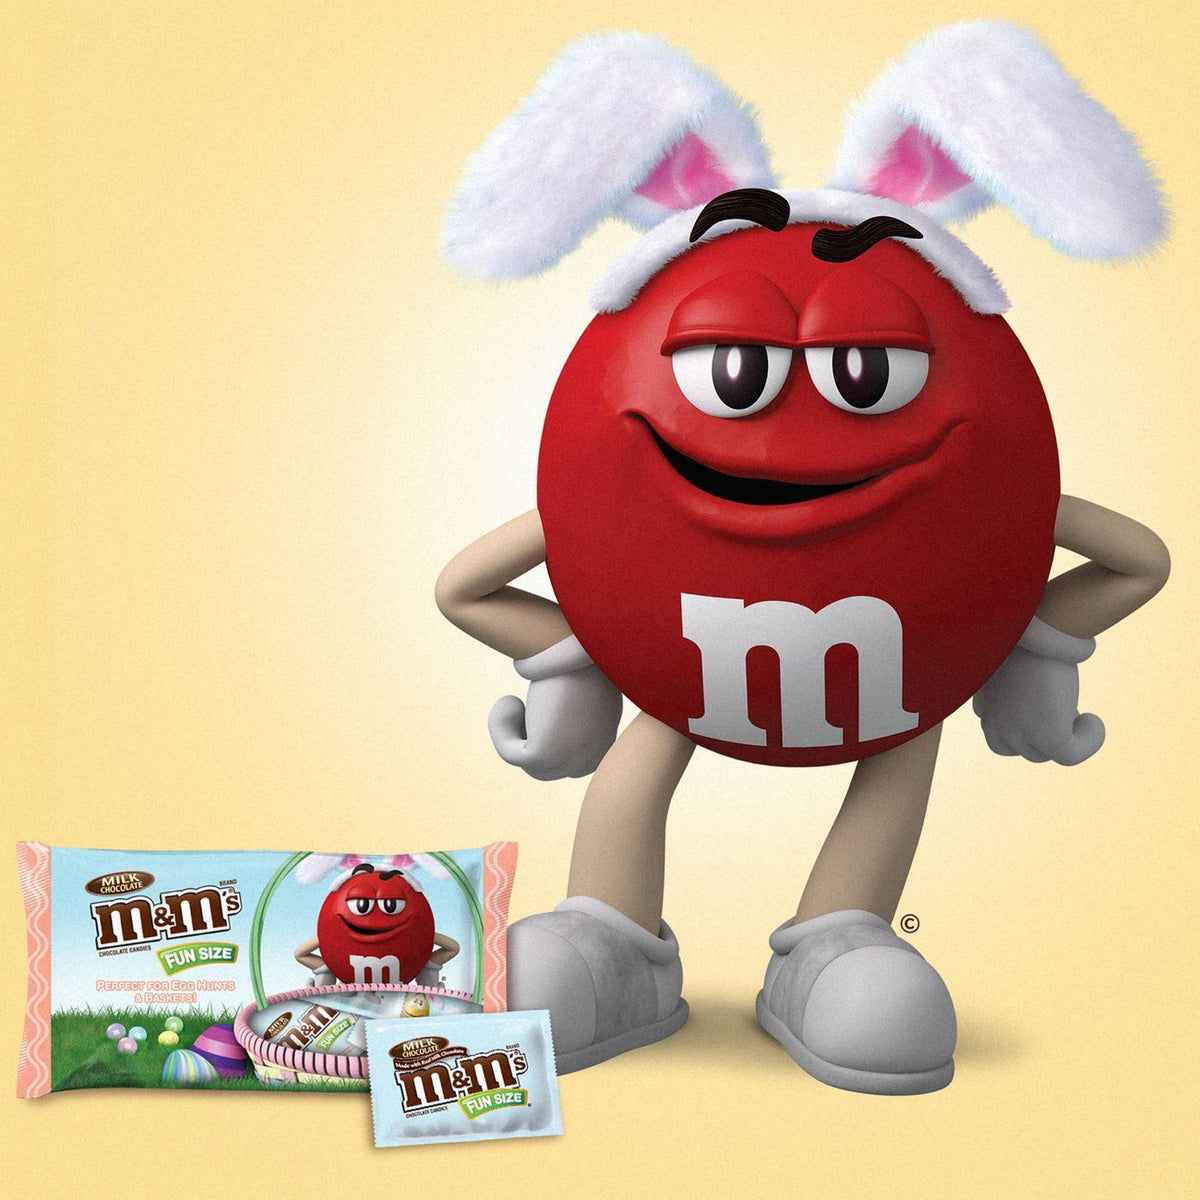 040000513155 - M&M's Easter Fun Size Milk Chocolate Egg Hunt Candy